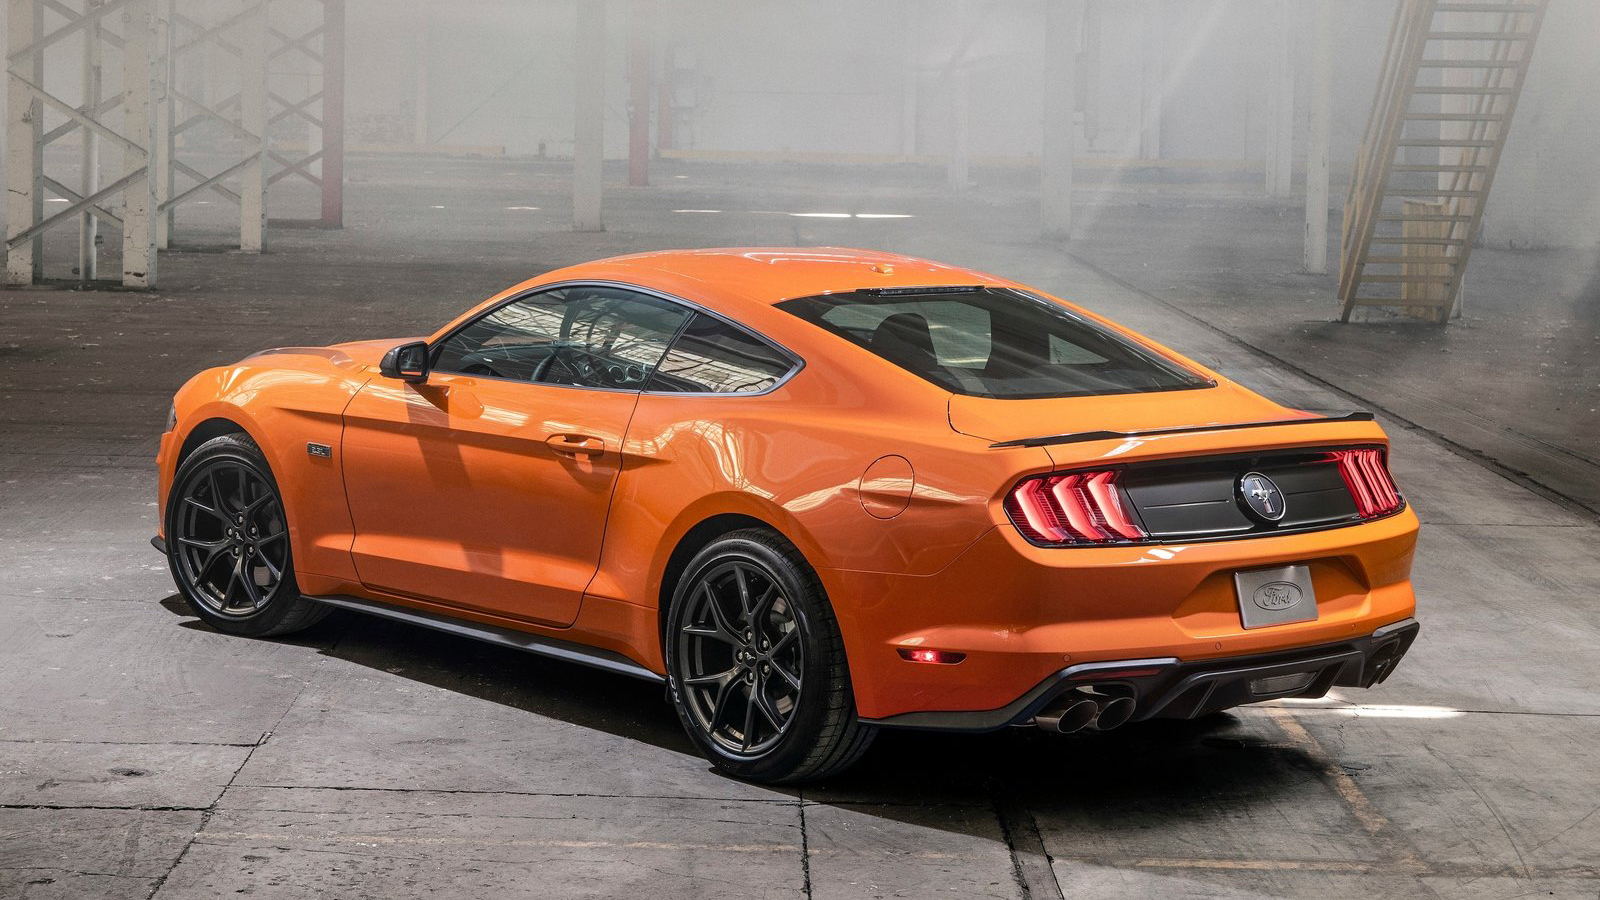 Ford Mustang, ένα από τα κορυφαία αυτοκίνητα